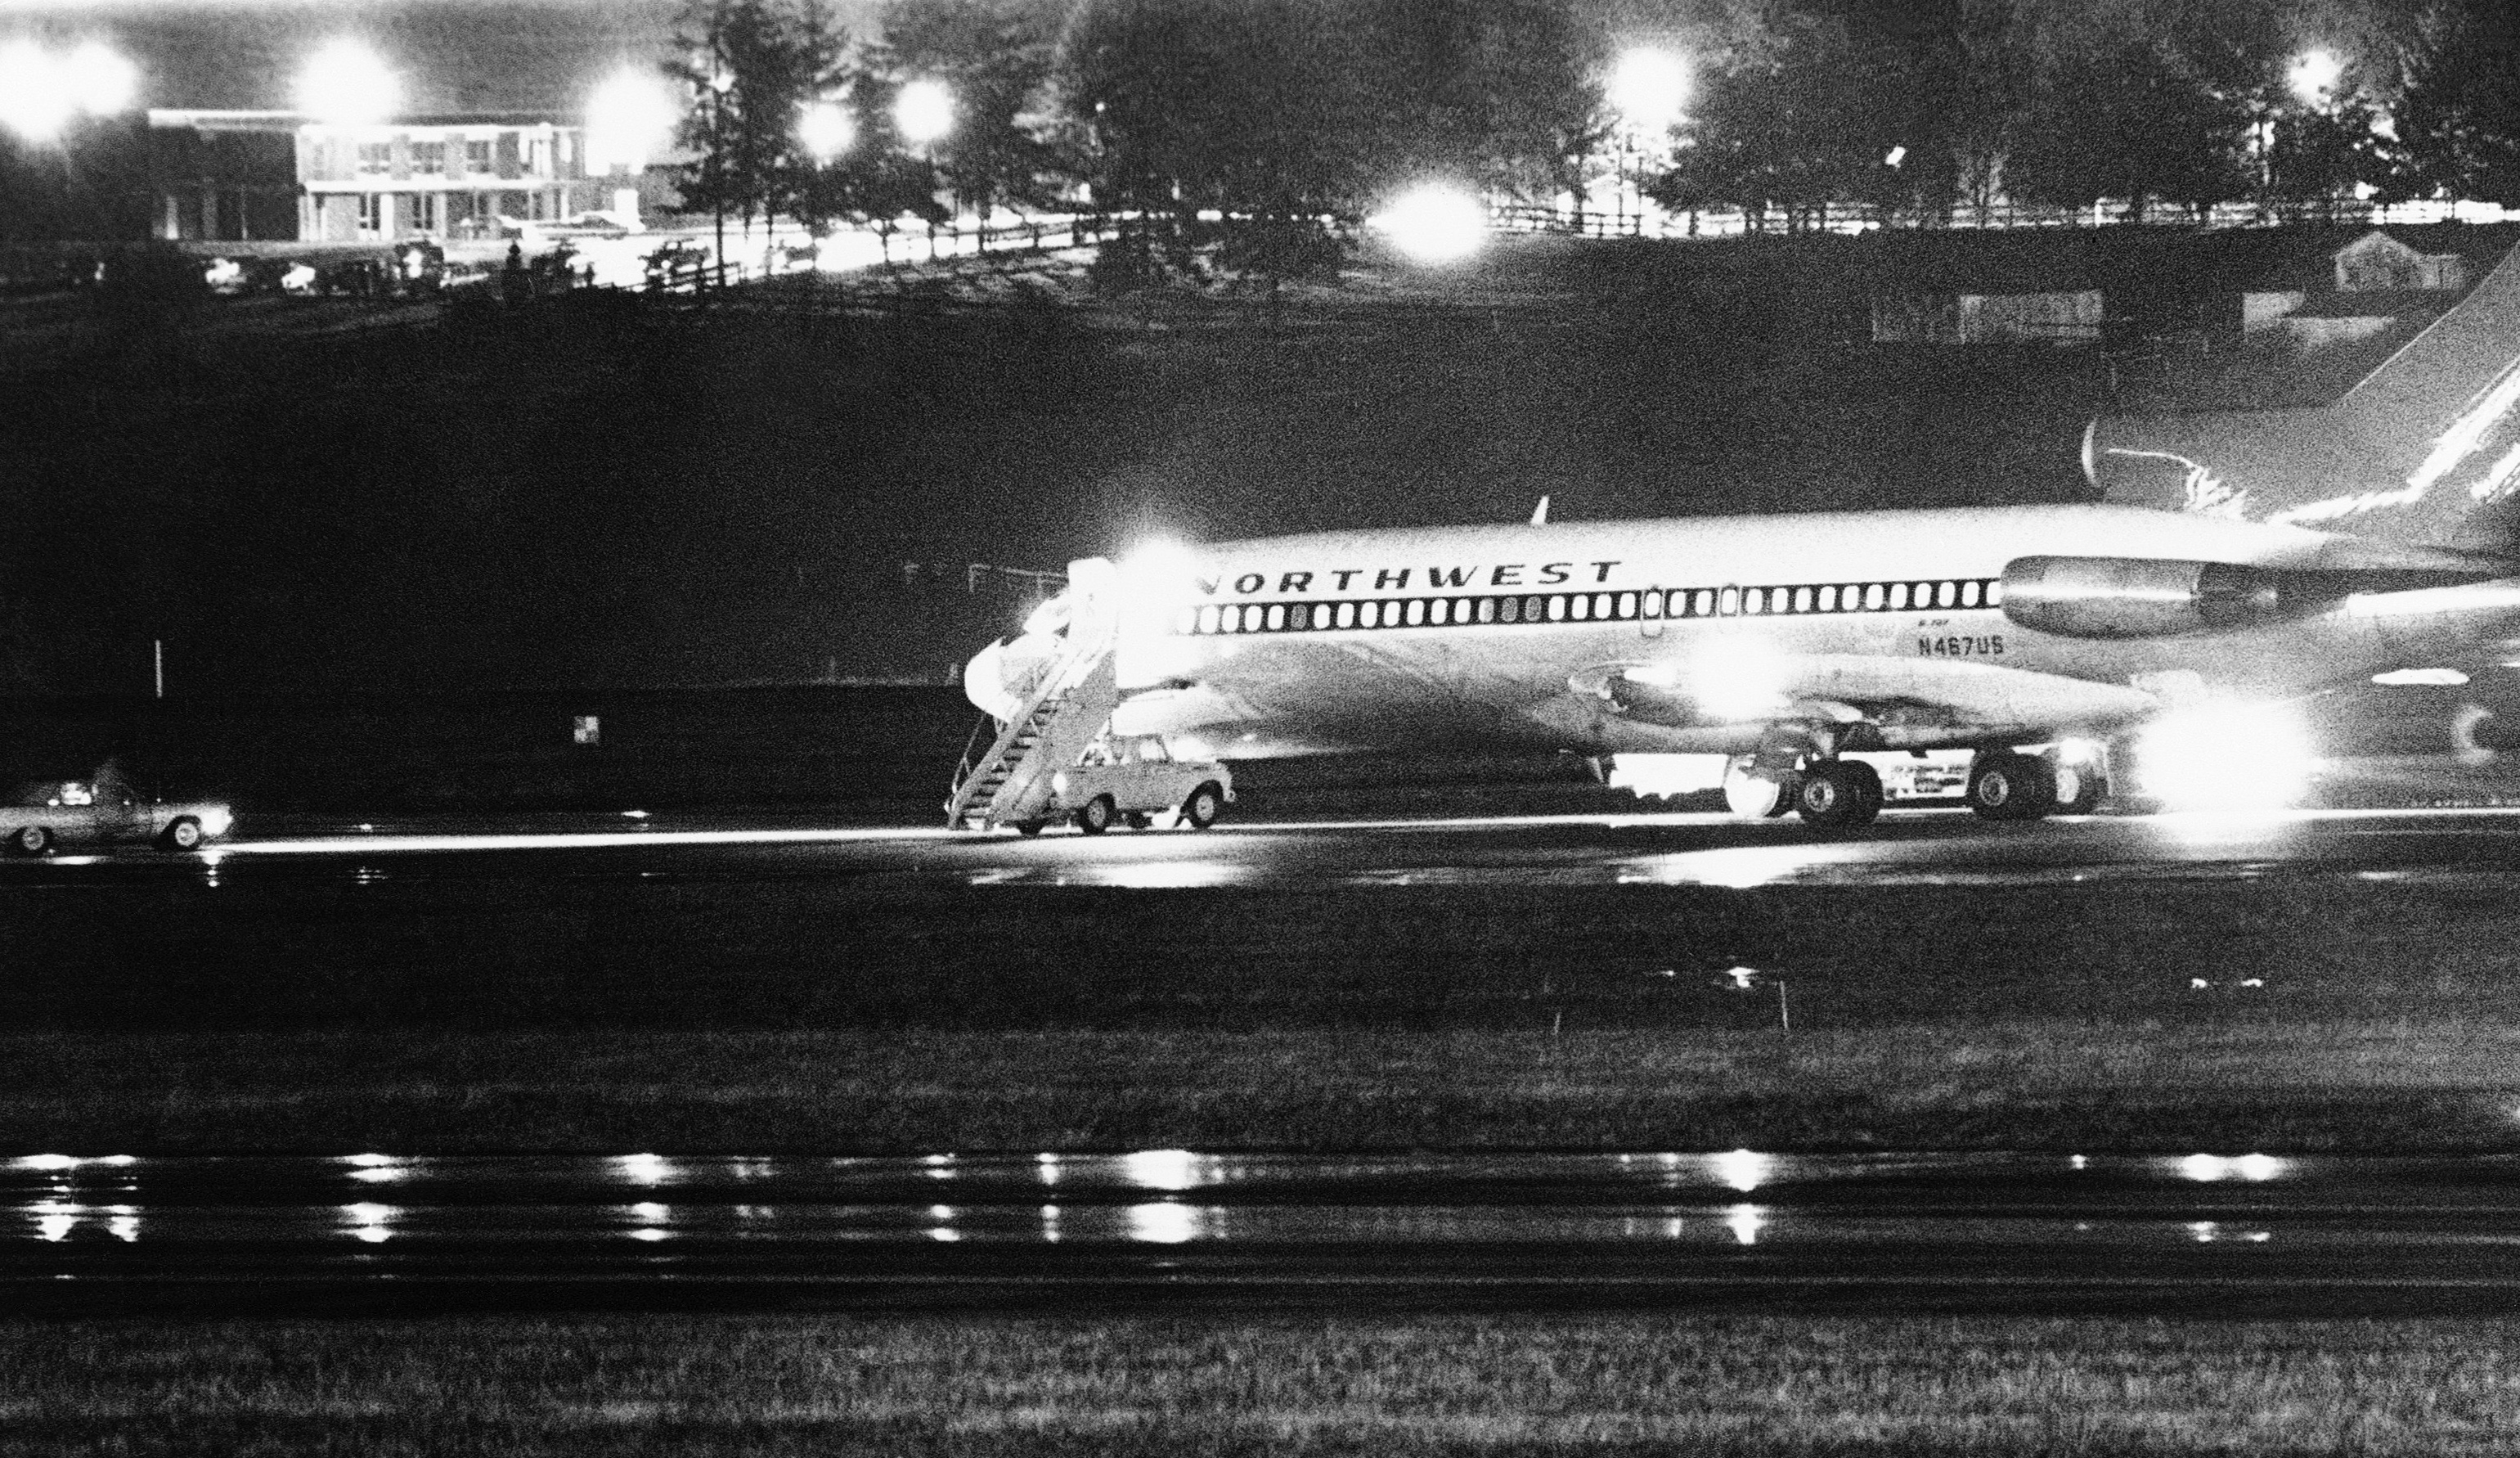 Northwest Flight 305 was hijacked during the final leg of its flight from Portland to Seattle on November 24, 1971